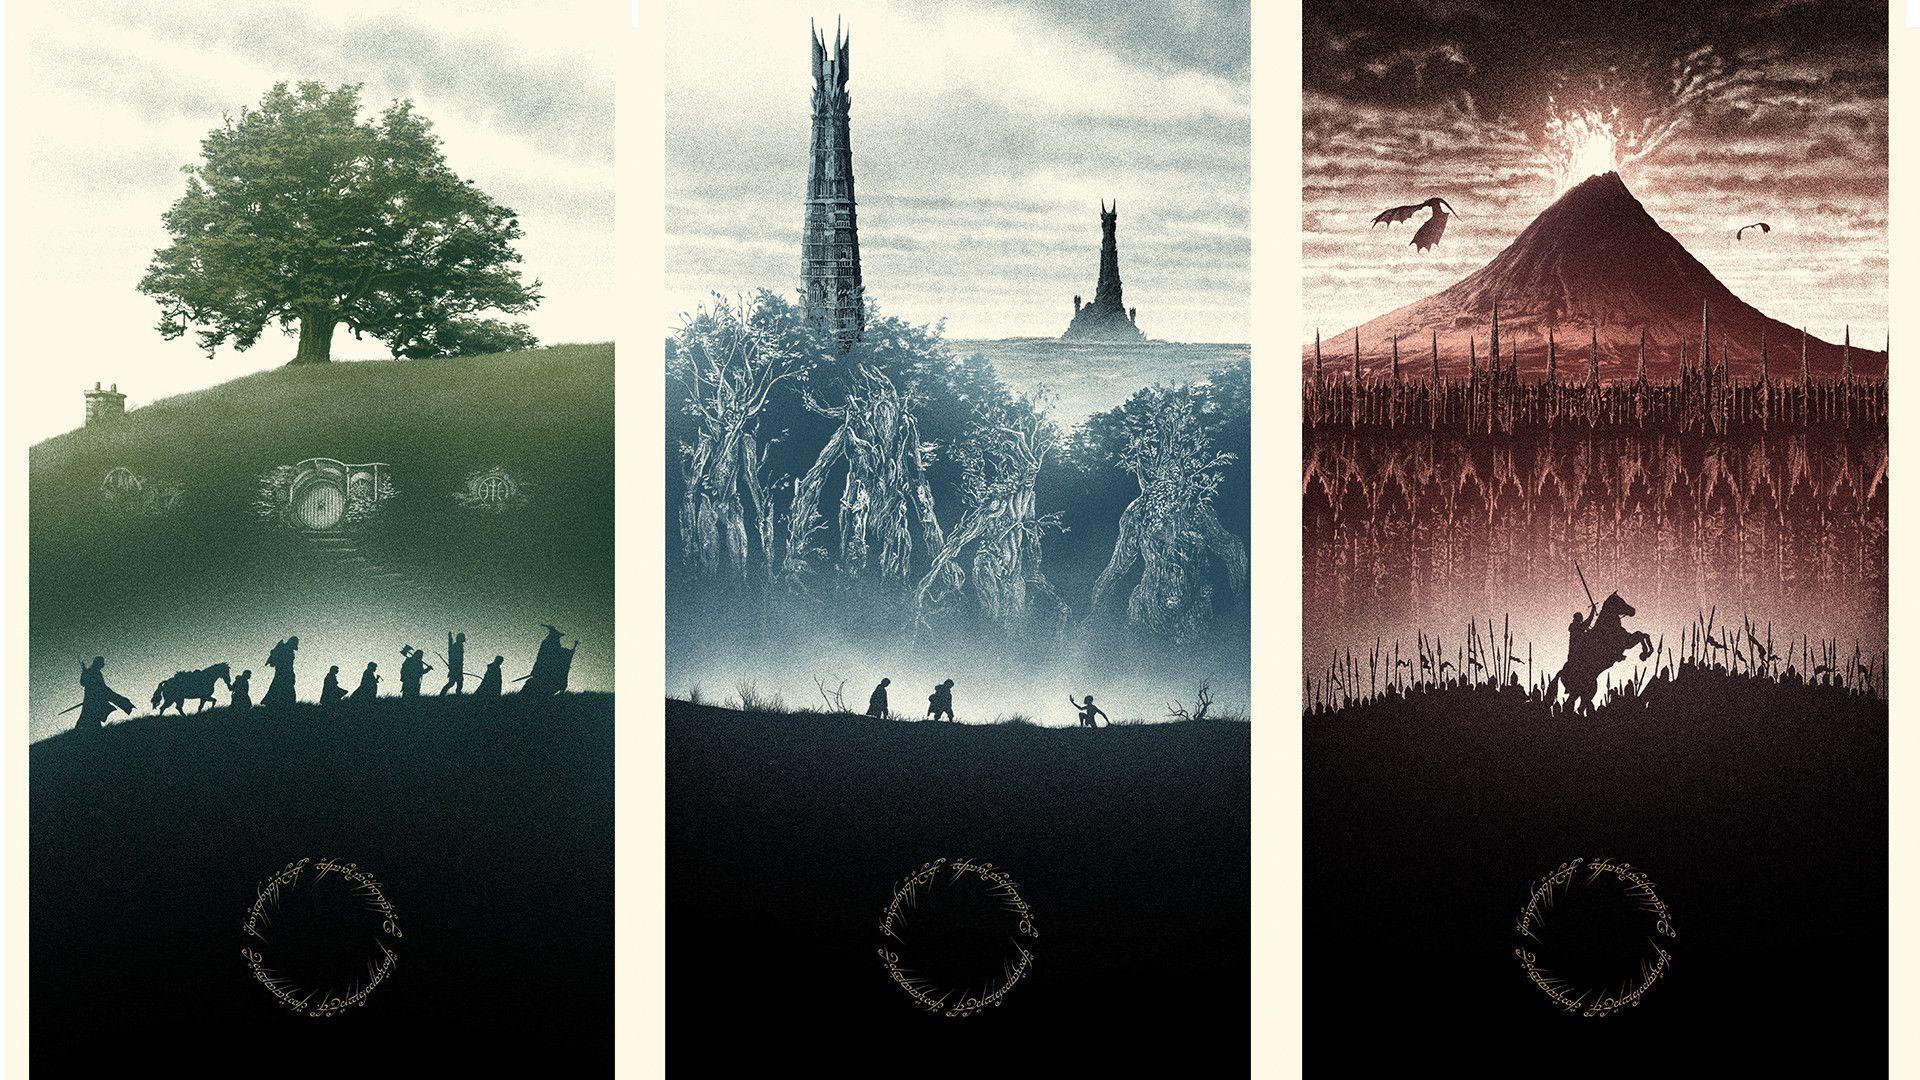 Lord Of The Rings Wallpaper HD